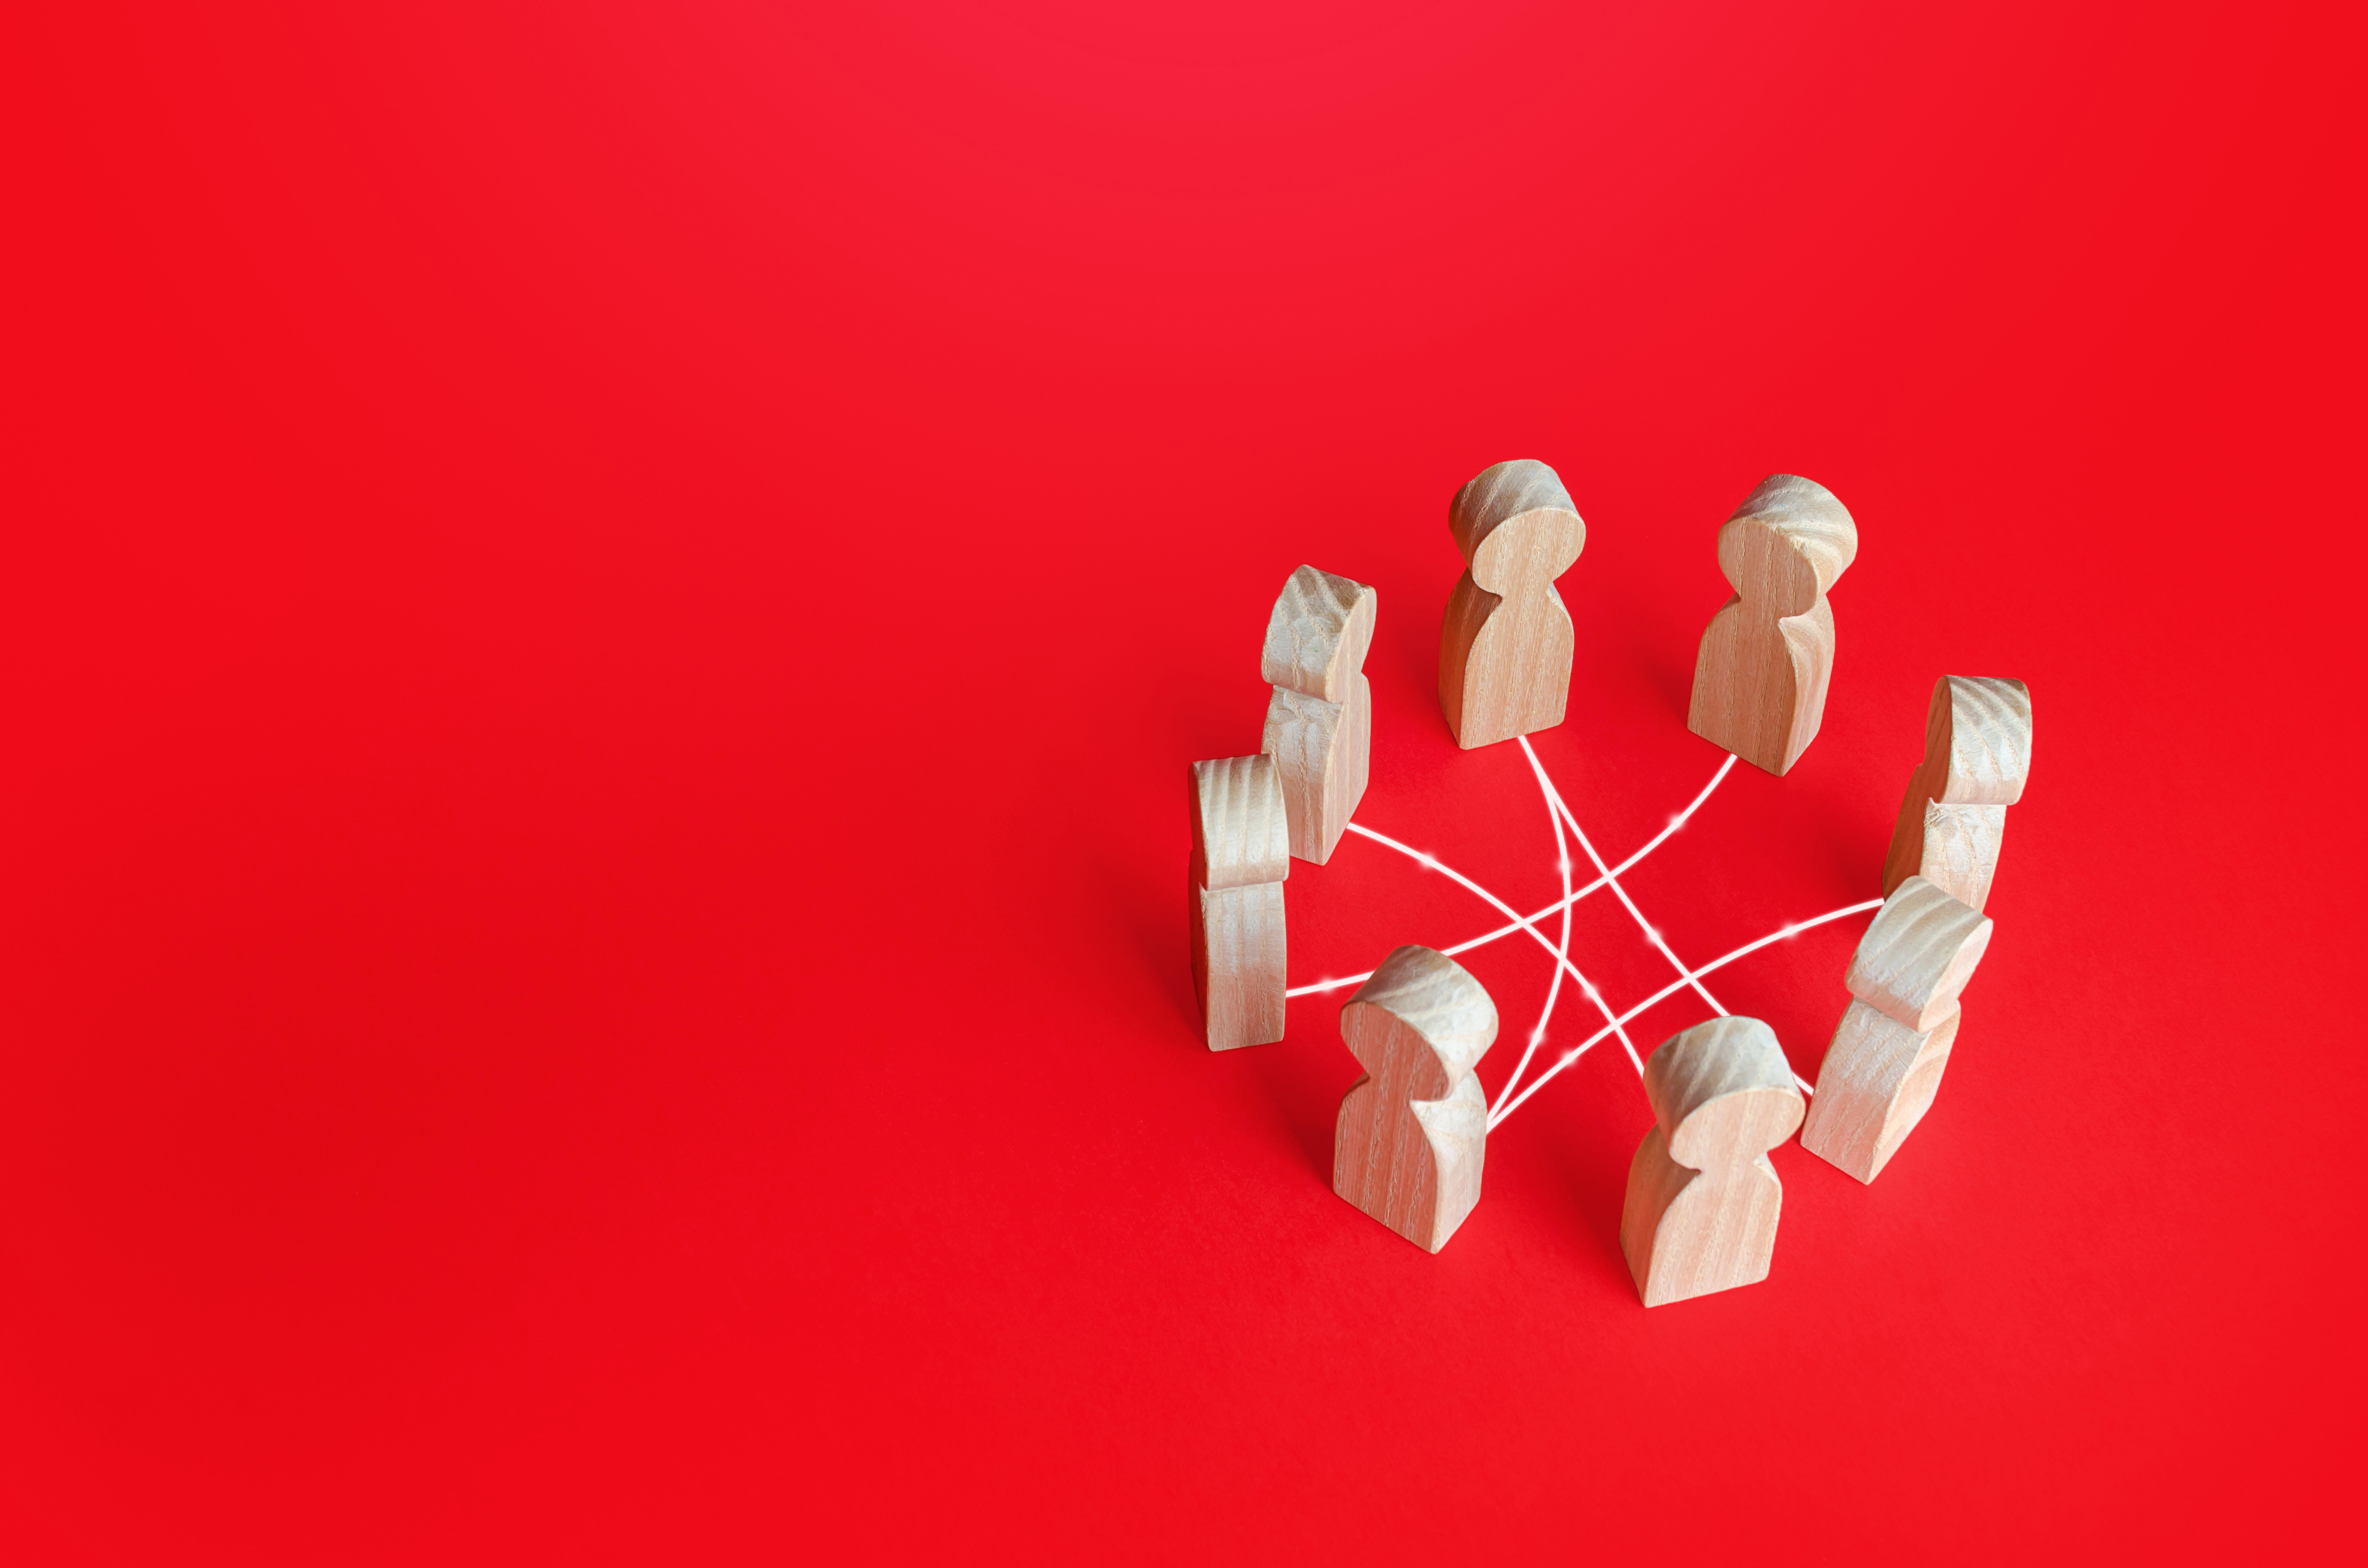 A group of wooden figures forms a network on a red background.